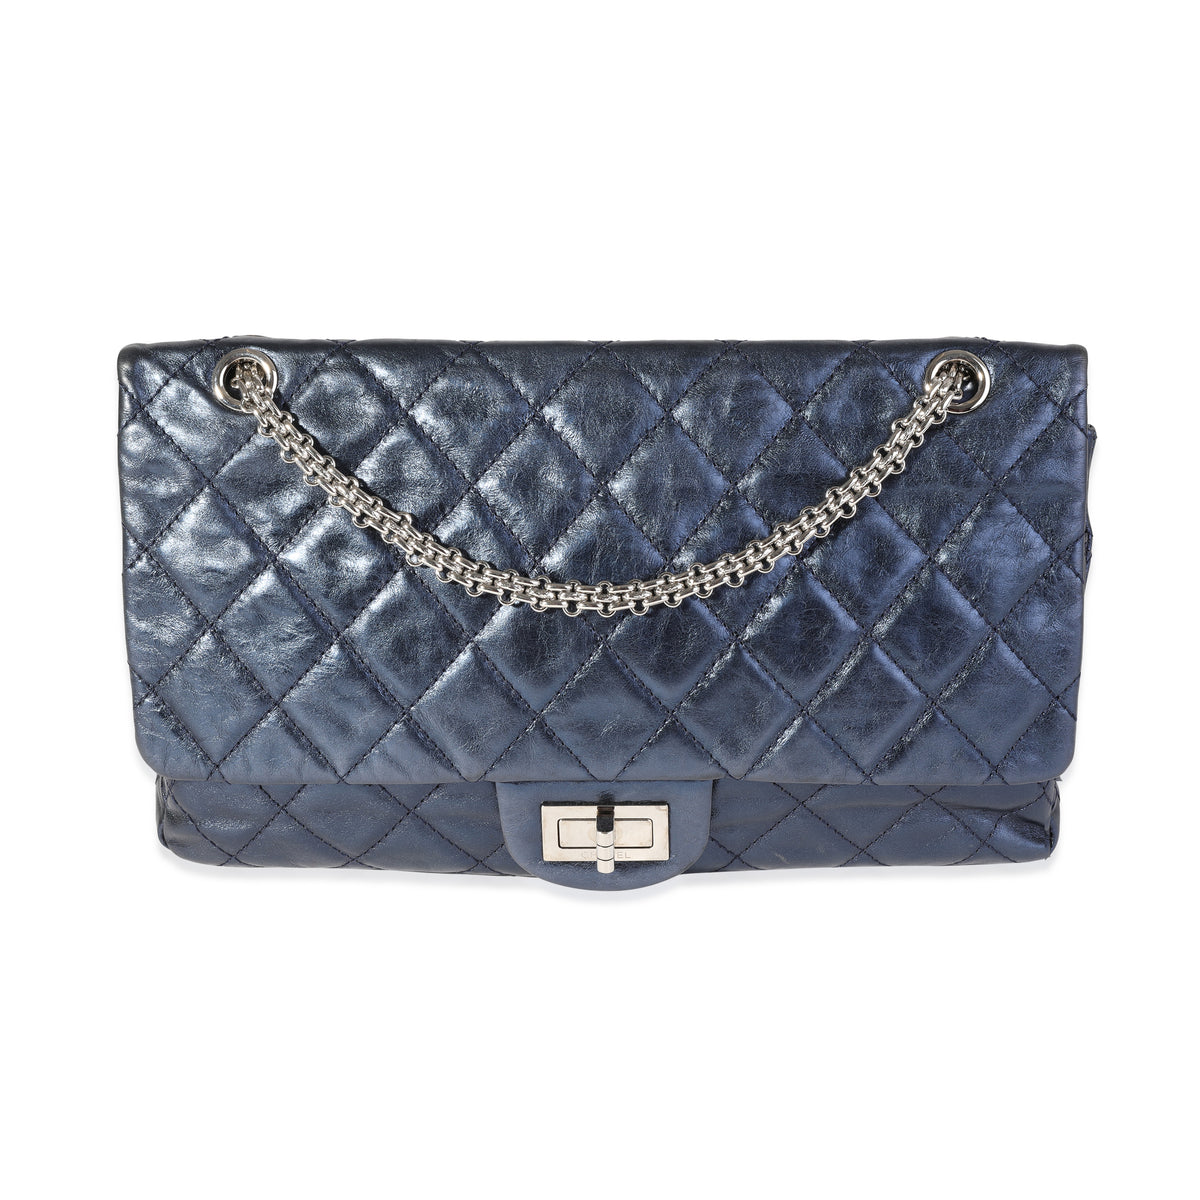 Chanel Metallic Blue Quilted Aged Calfskin Reissue 2.55 227 Double